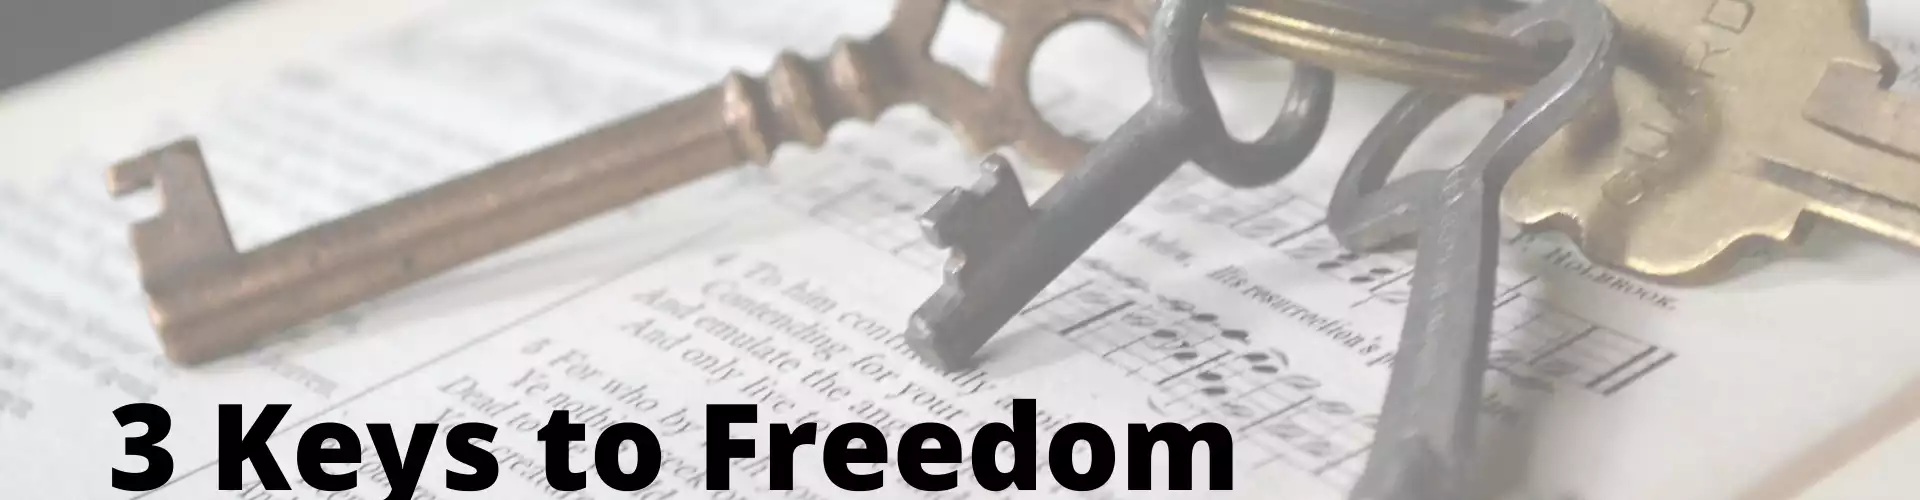 3 Keys to Freedom - How to Create Emotional and Financial Freedom